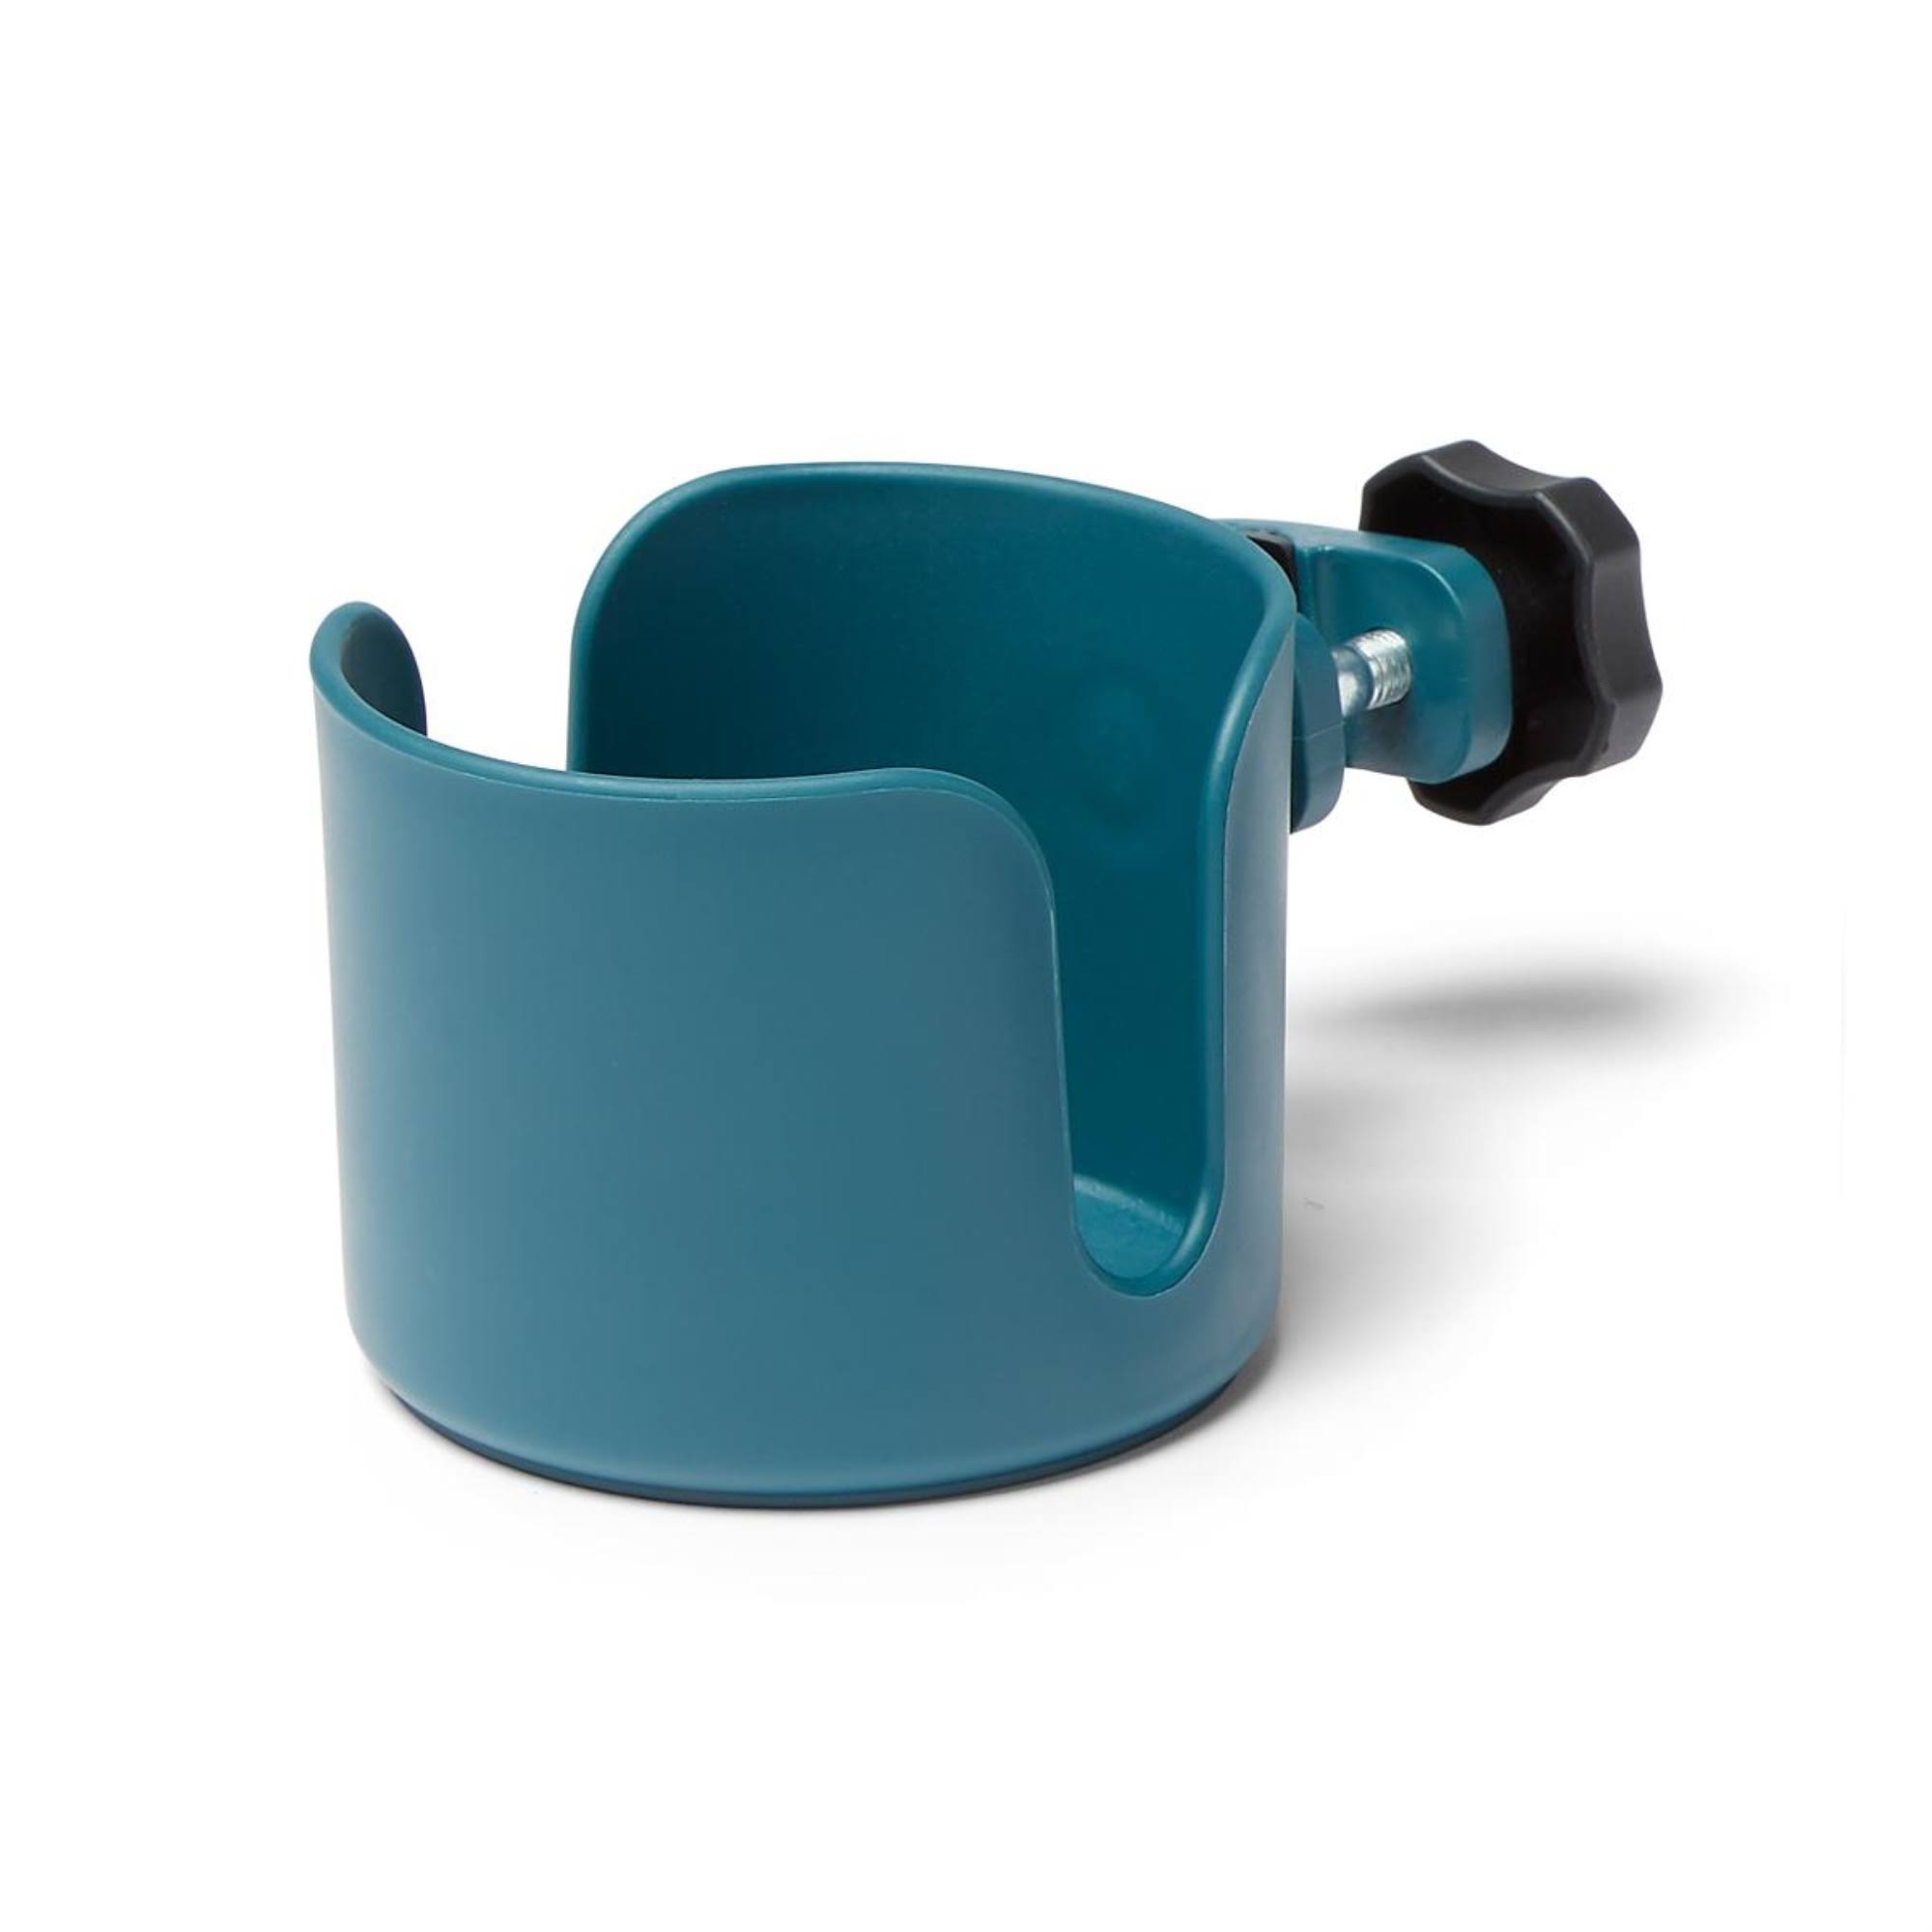 Medline Universal Cup Holder For Rollator Walkers, Transport Chairs, and Wheelchairs, Teal | Medical Supplies & Equipment